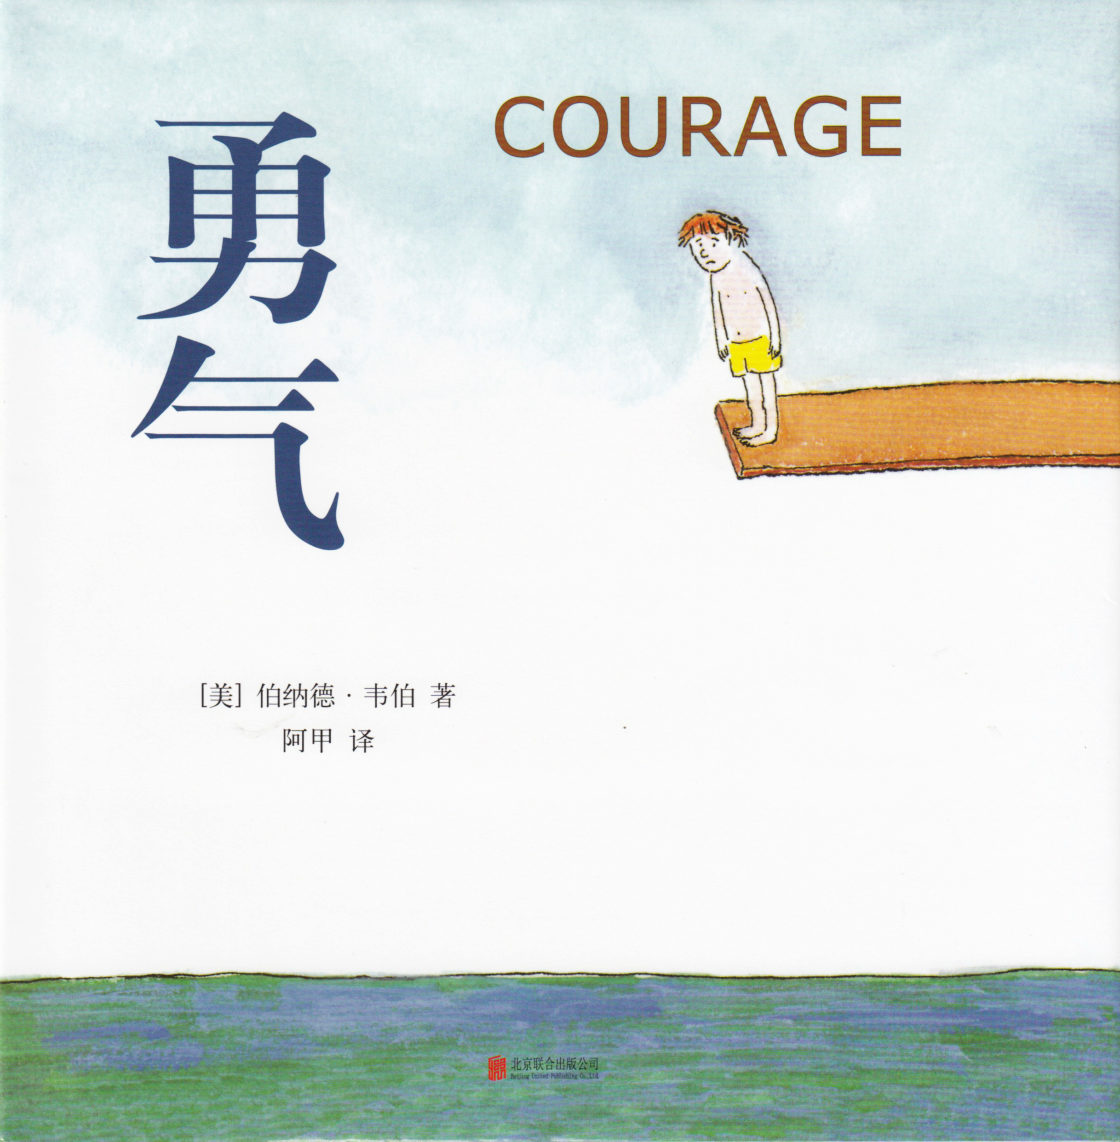 Courage (Chinese)